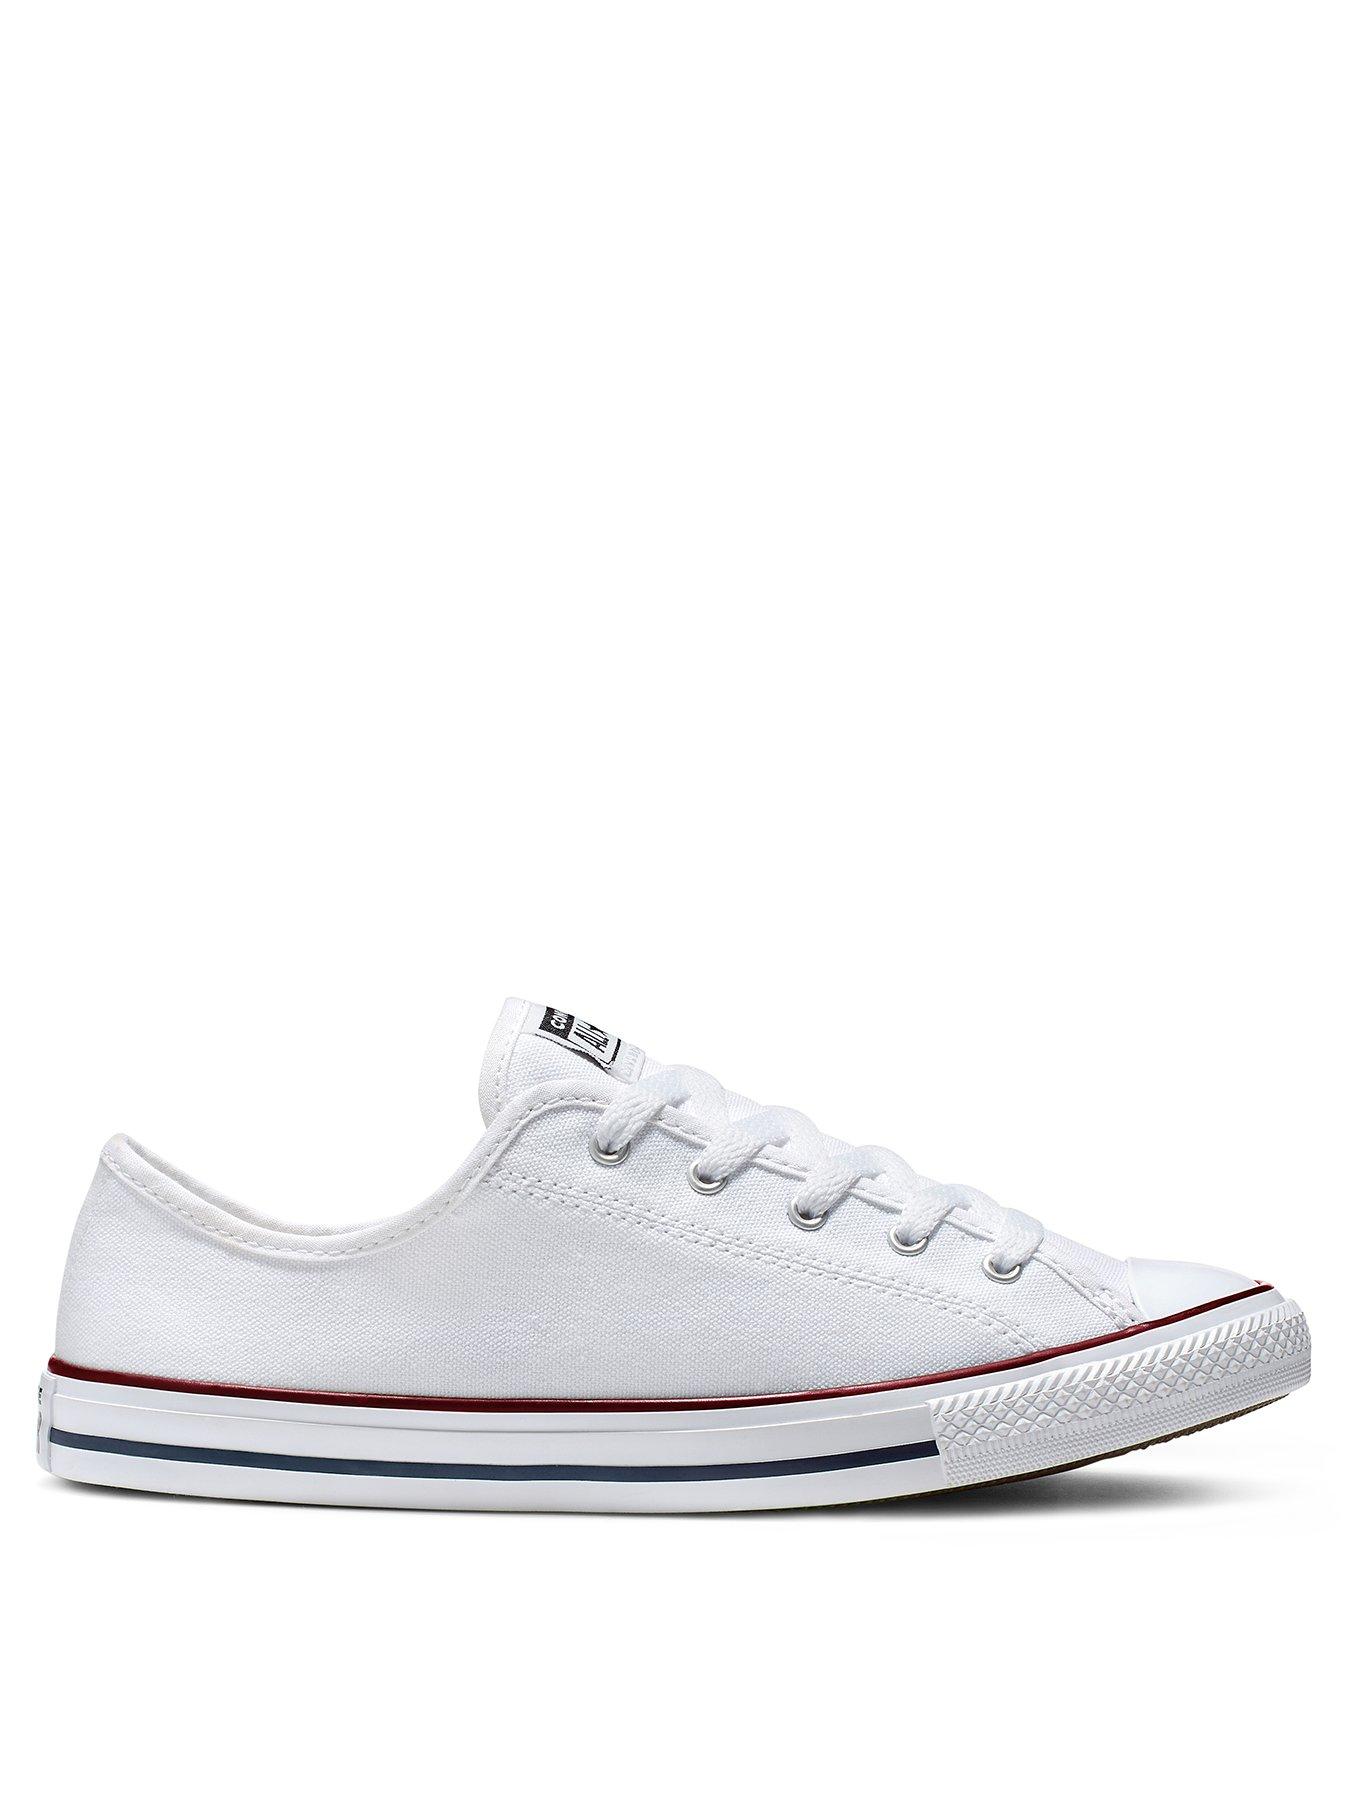 converse chuck taylor all star dainty white